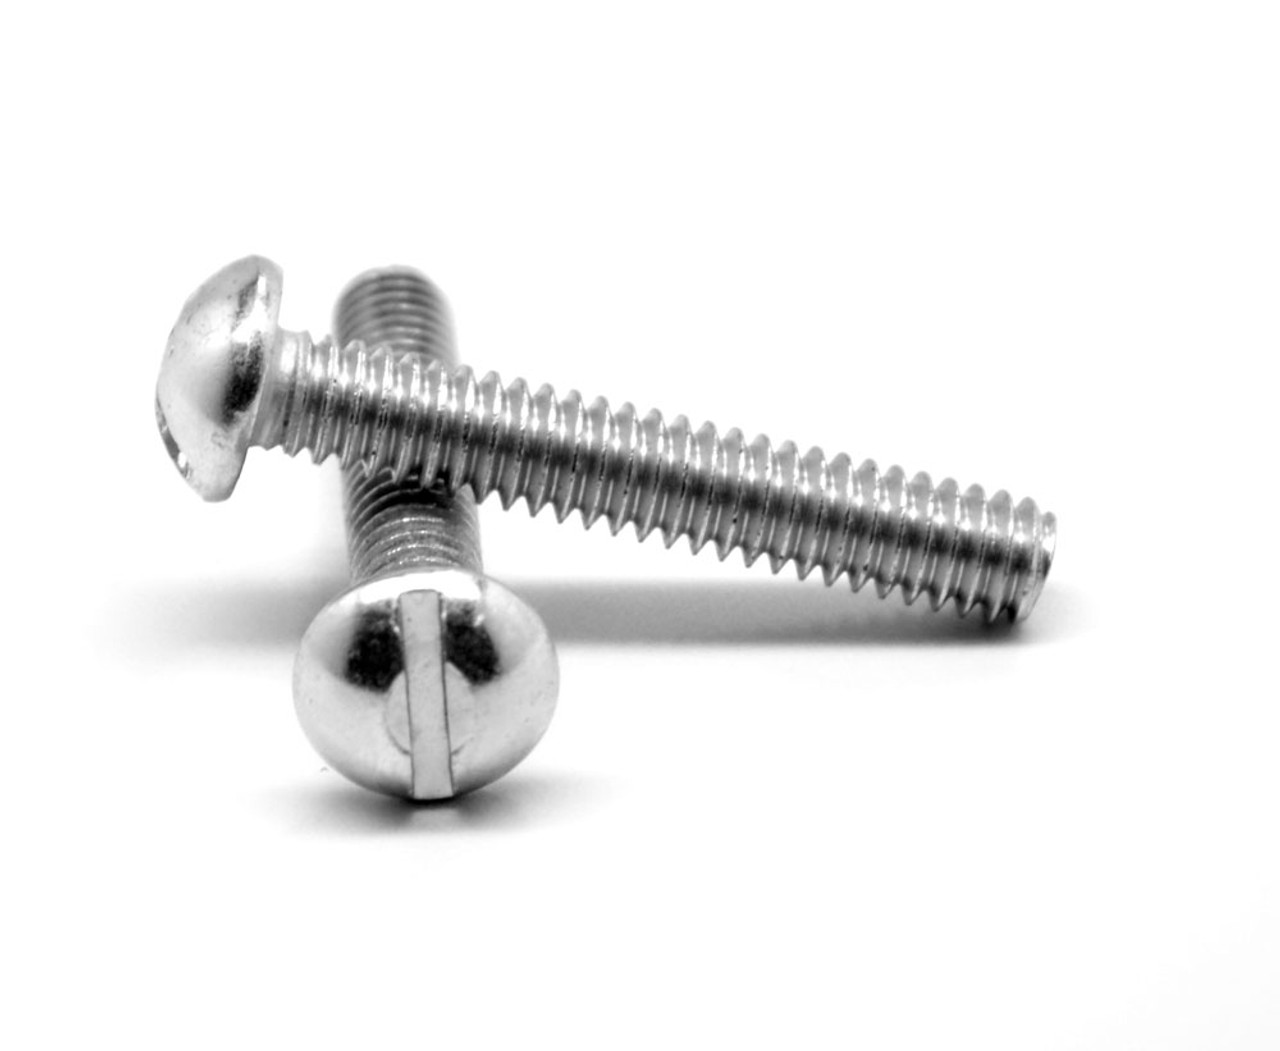 1/4"-20 x 1 3/8" (FT) Coarse Thread Machine Screw Slotted Round Head Low Carbon Steel Zinc Plated